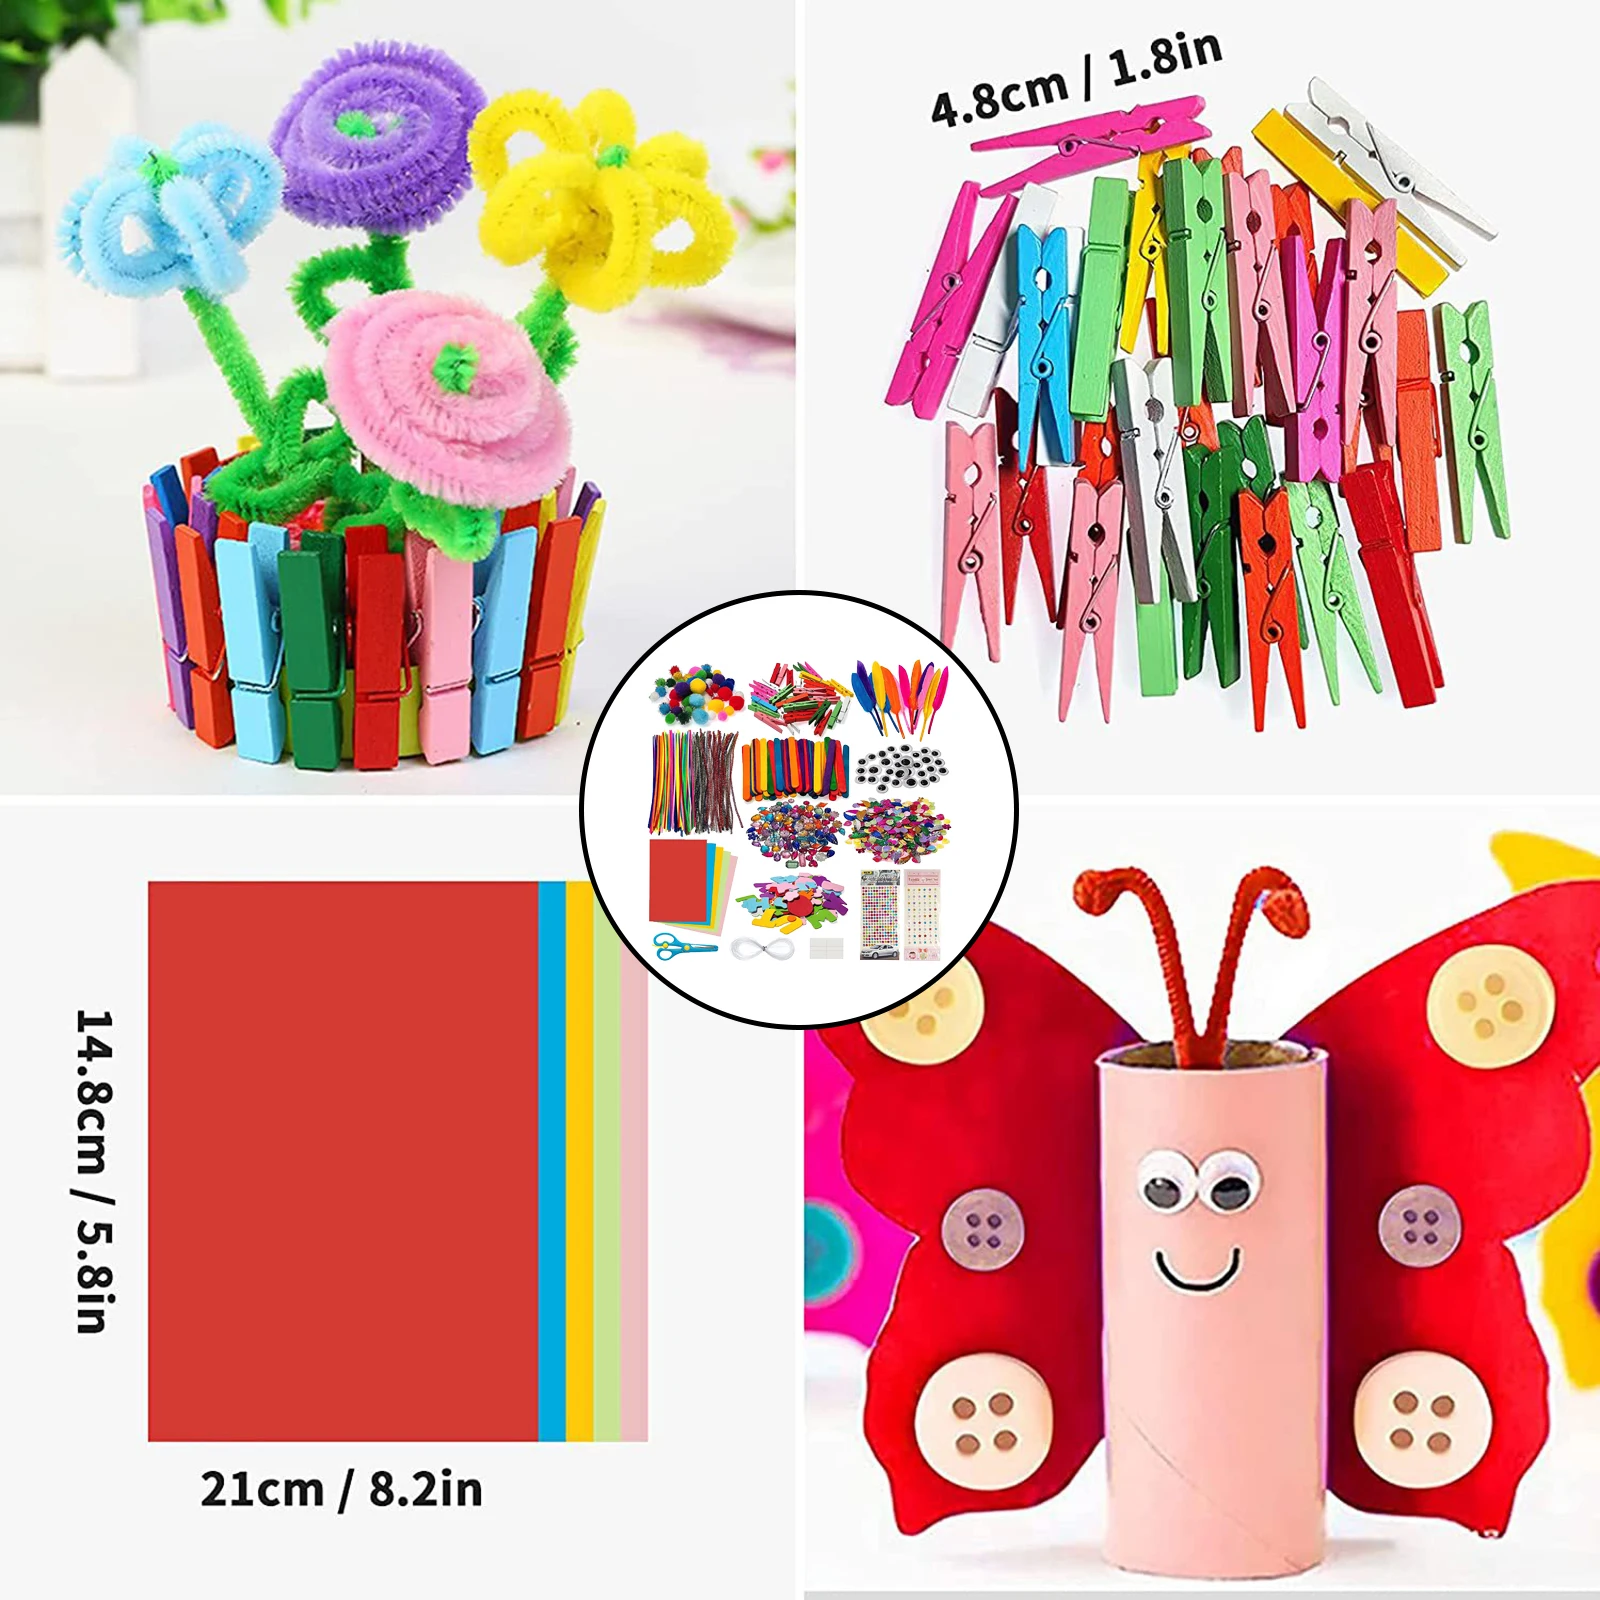 DIY Toys Kids Handmade Art Craft Material Creativity Toy Gifts Colorful Plush Stick Pompoms Doll Eyes DIY Set Accessories